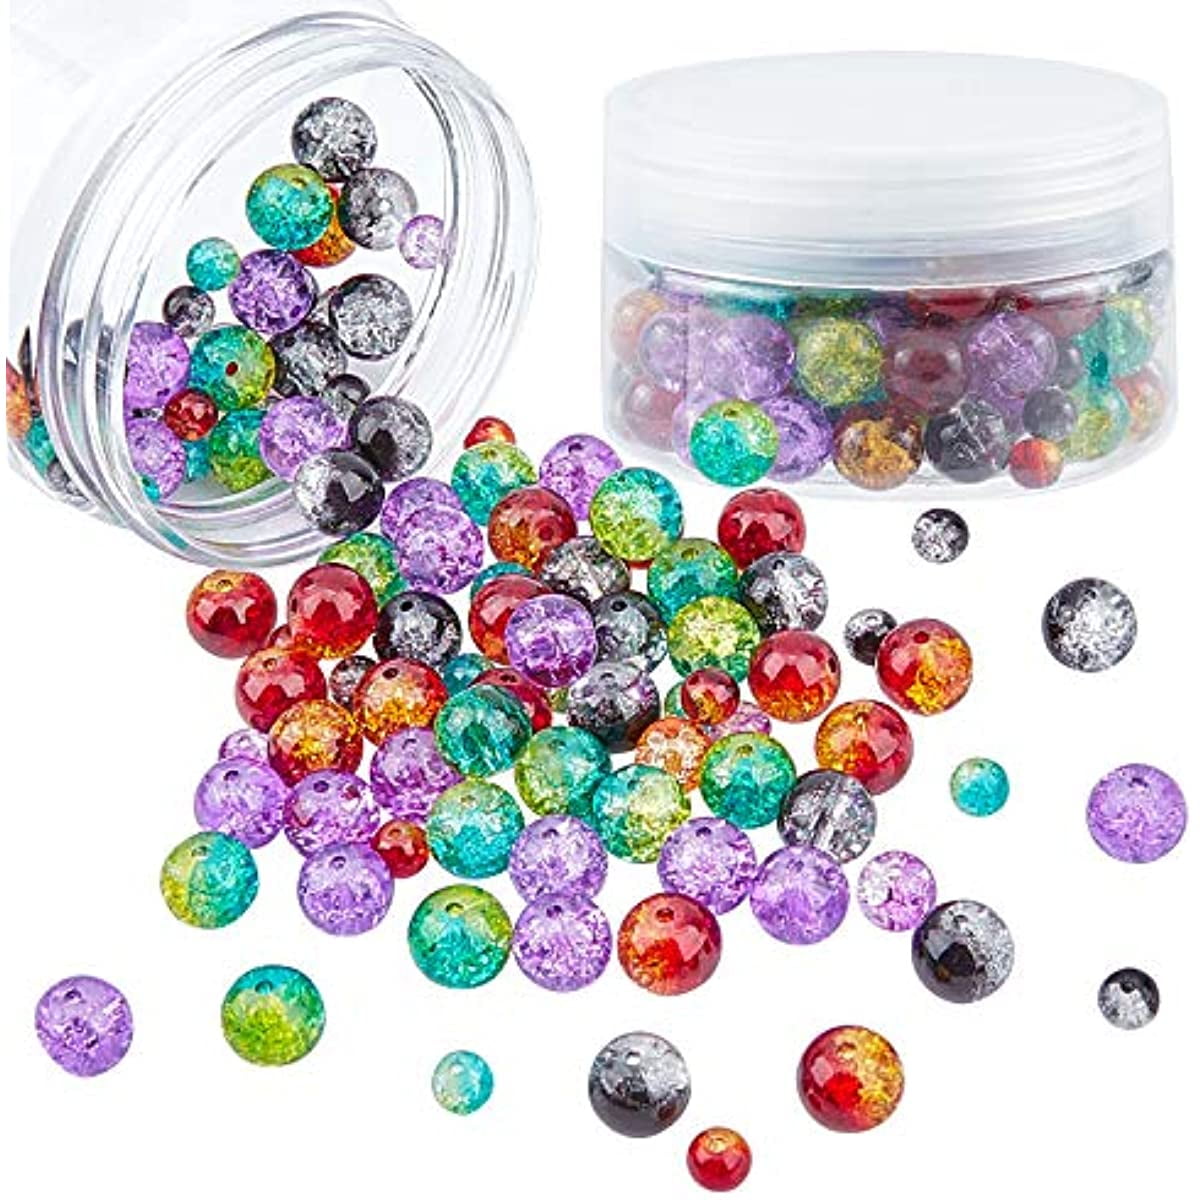 Suhome 1920pcs 8 Color Crackle Lampwork Glass Beads 4mm 6mm 8mm